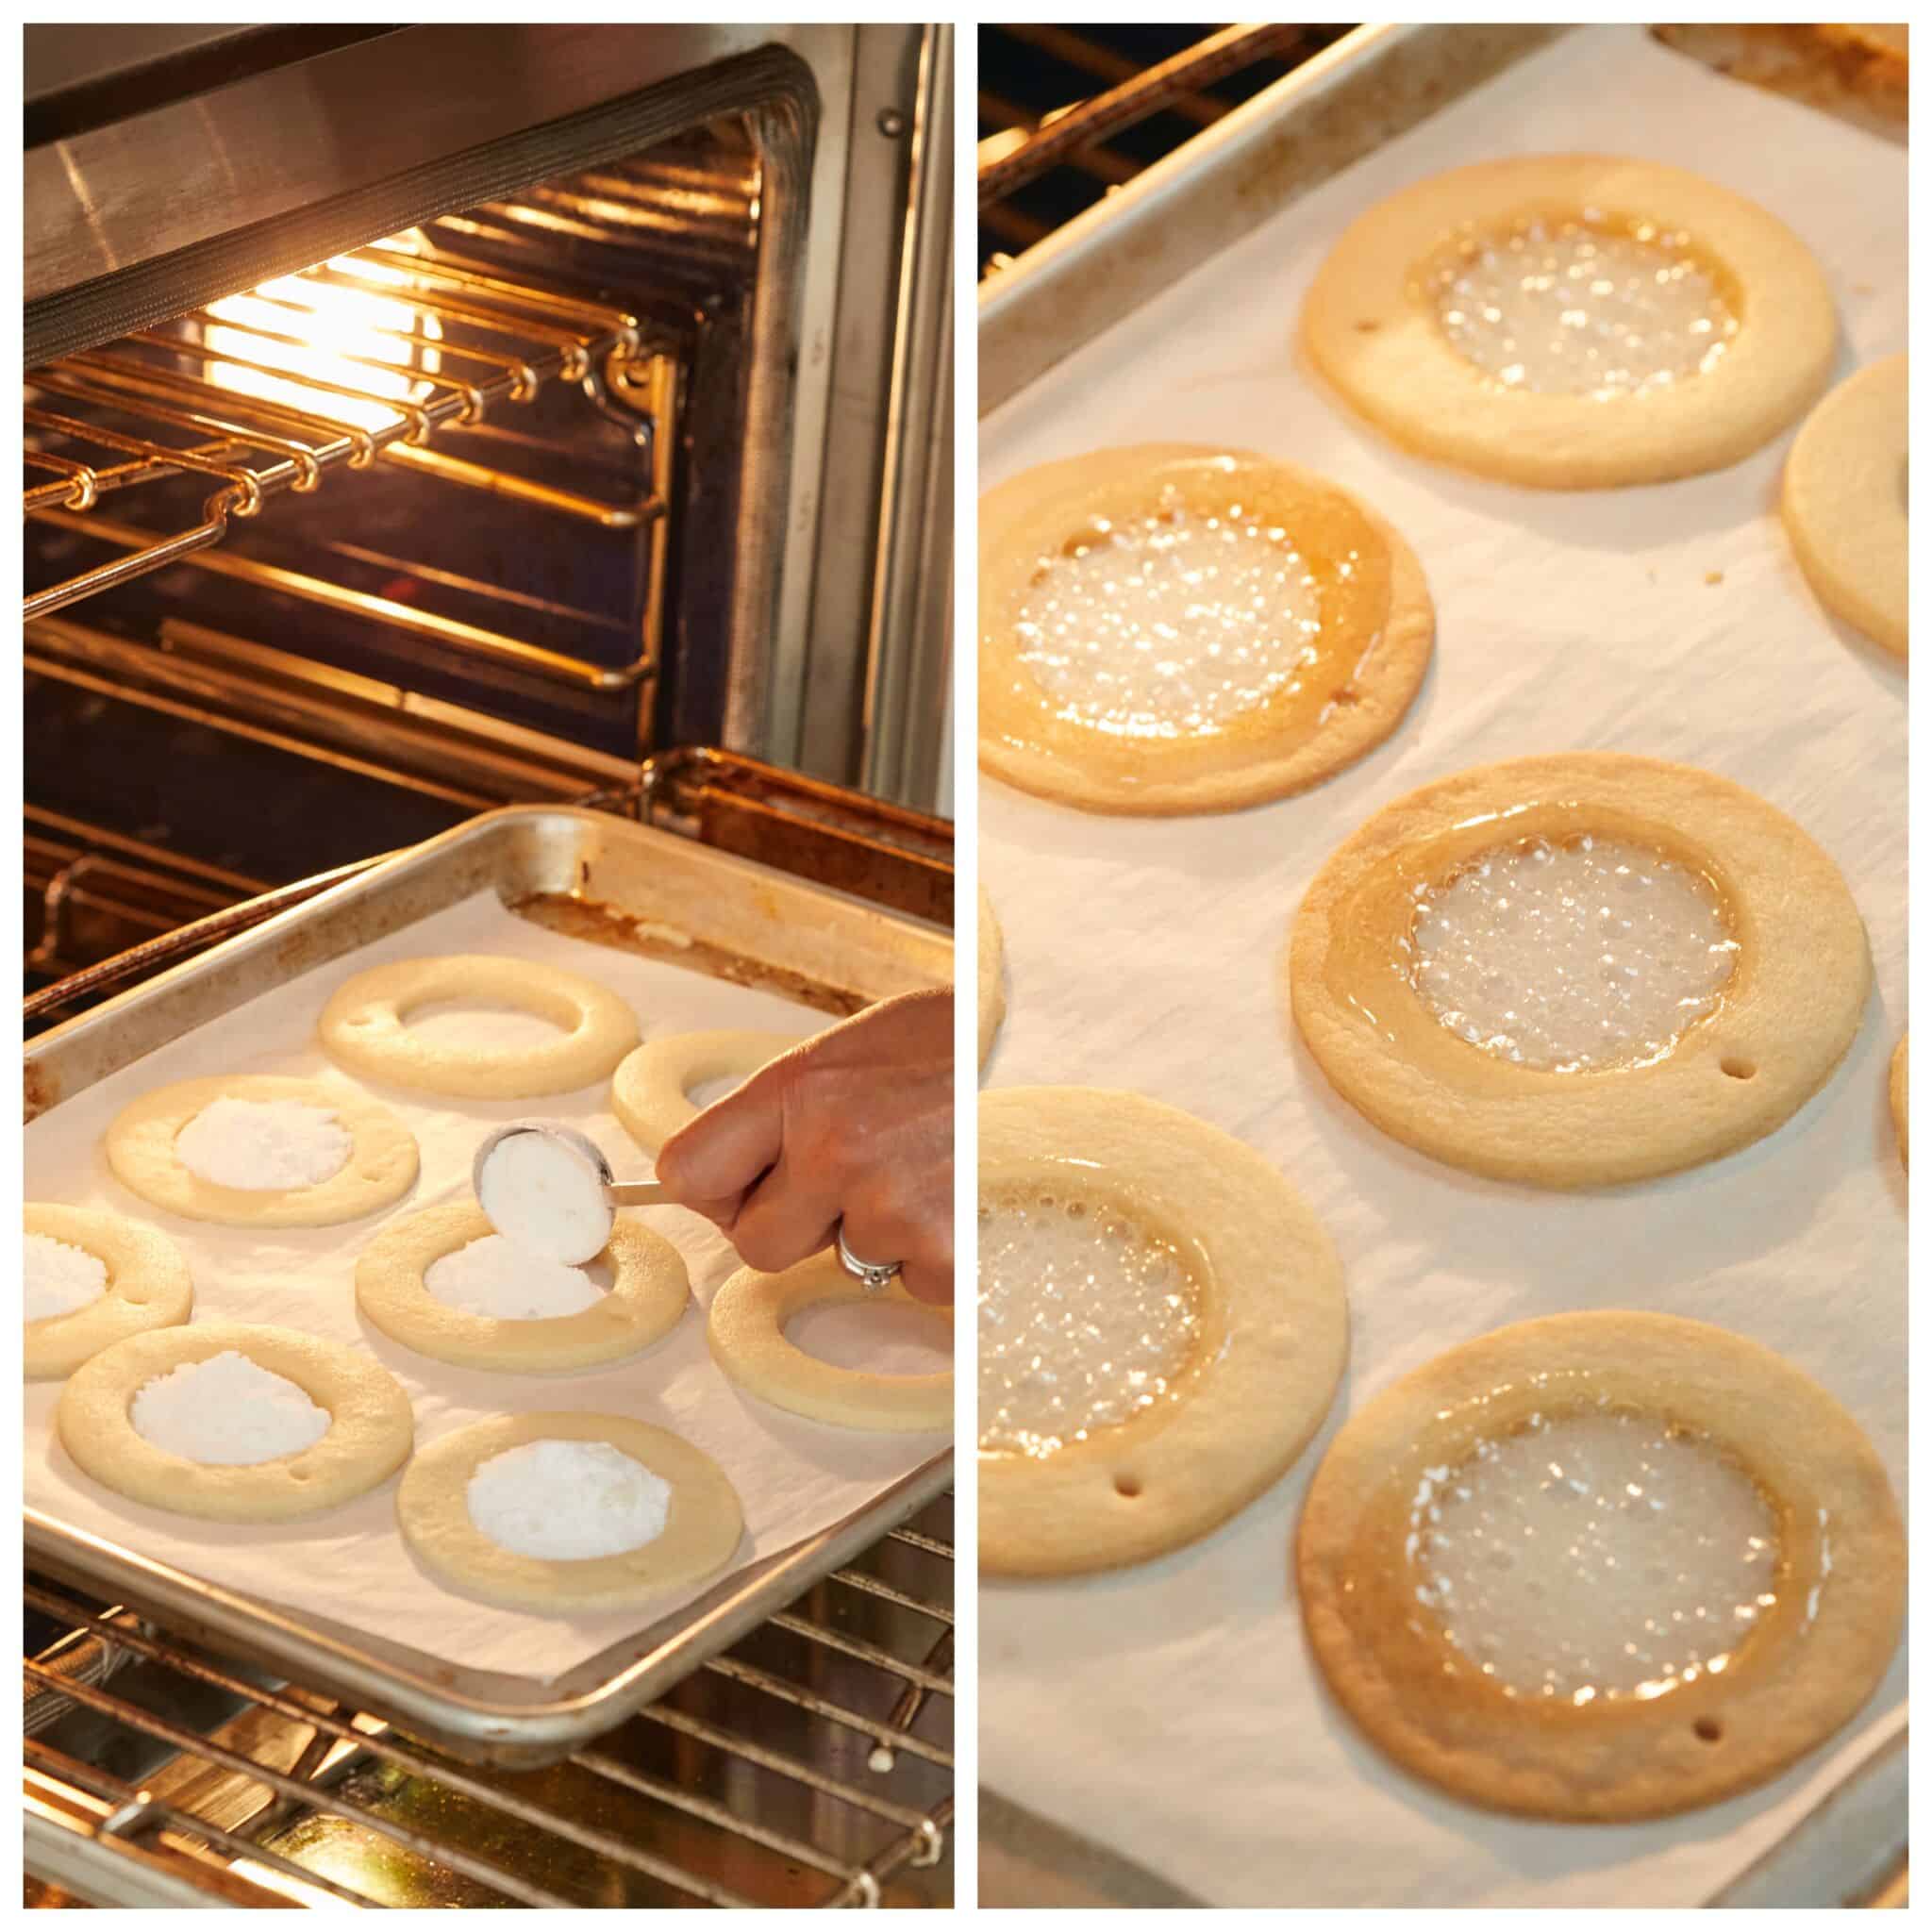 Step-by-step instruction on How to Make Snow Globe Cookies: Bake the cookies on parchment-paper lined sheets at 325°F (165°C) fan assist. After five minutes, add 1 tablespoon of ground candy to the centers. Bake for 5 minutes more, until the cookies are lightly golden and the candy is melted.